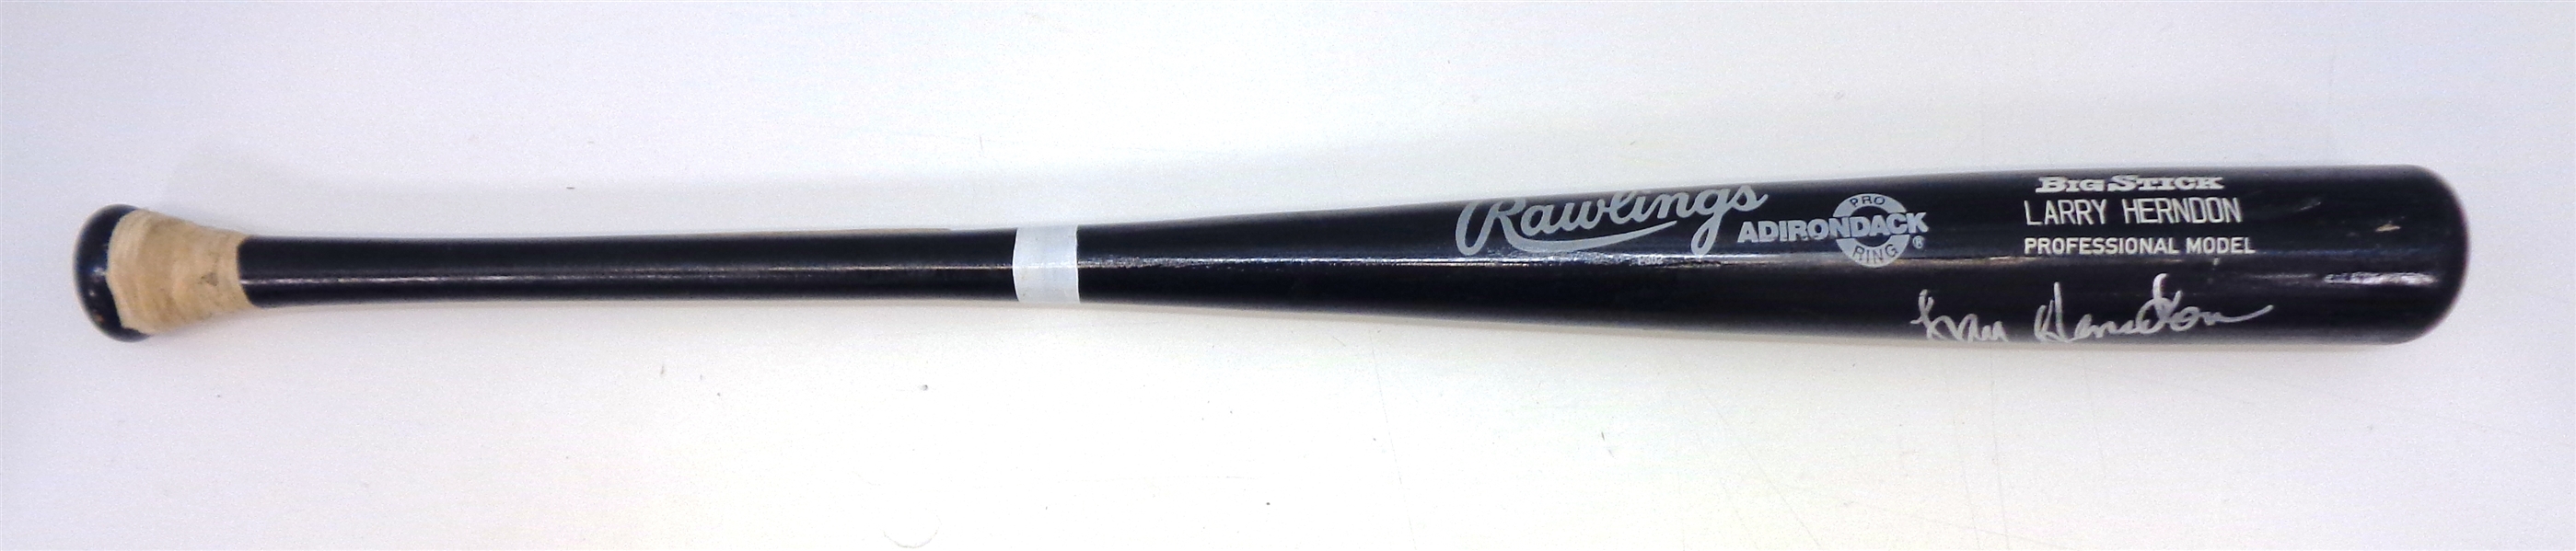 Larry Herndon Game Used Autographed Bat